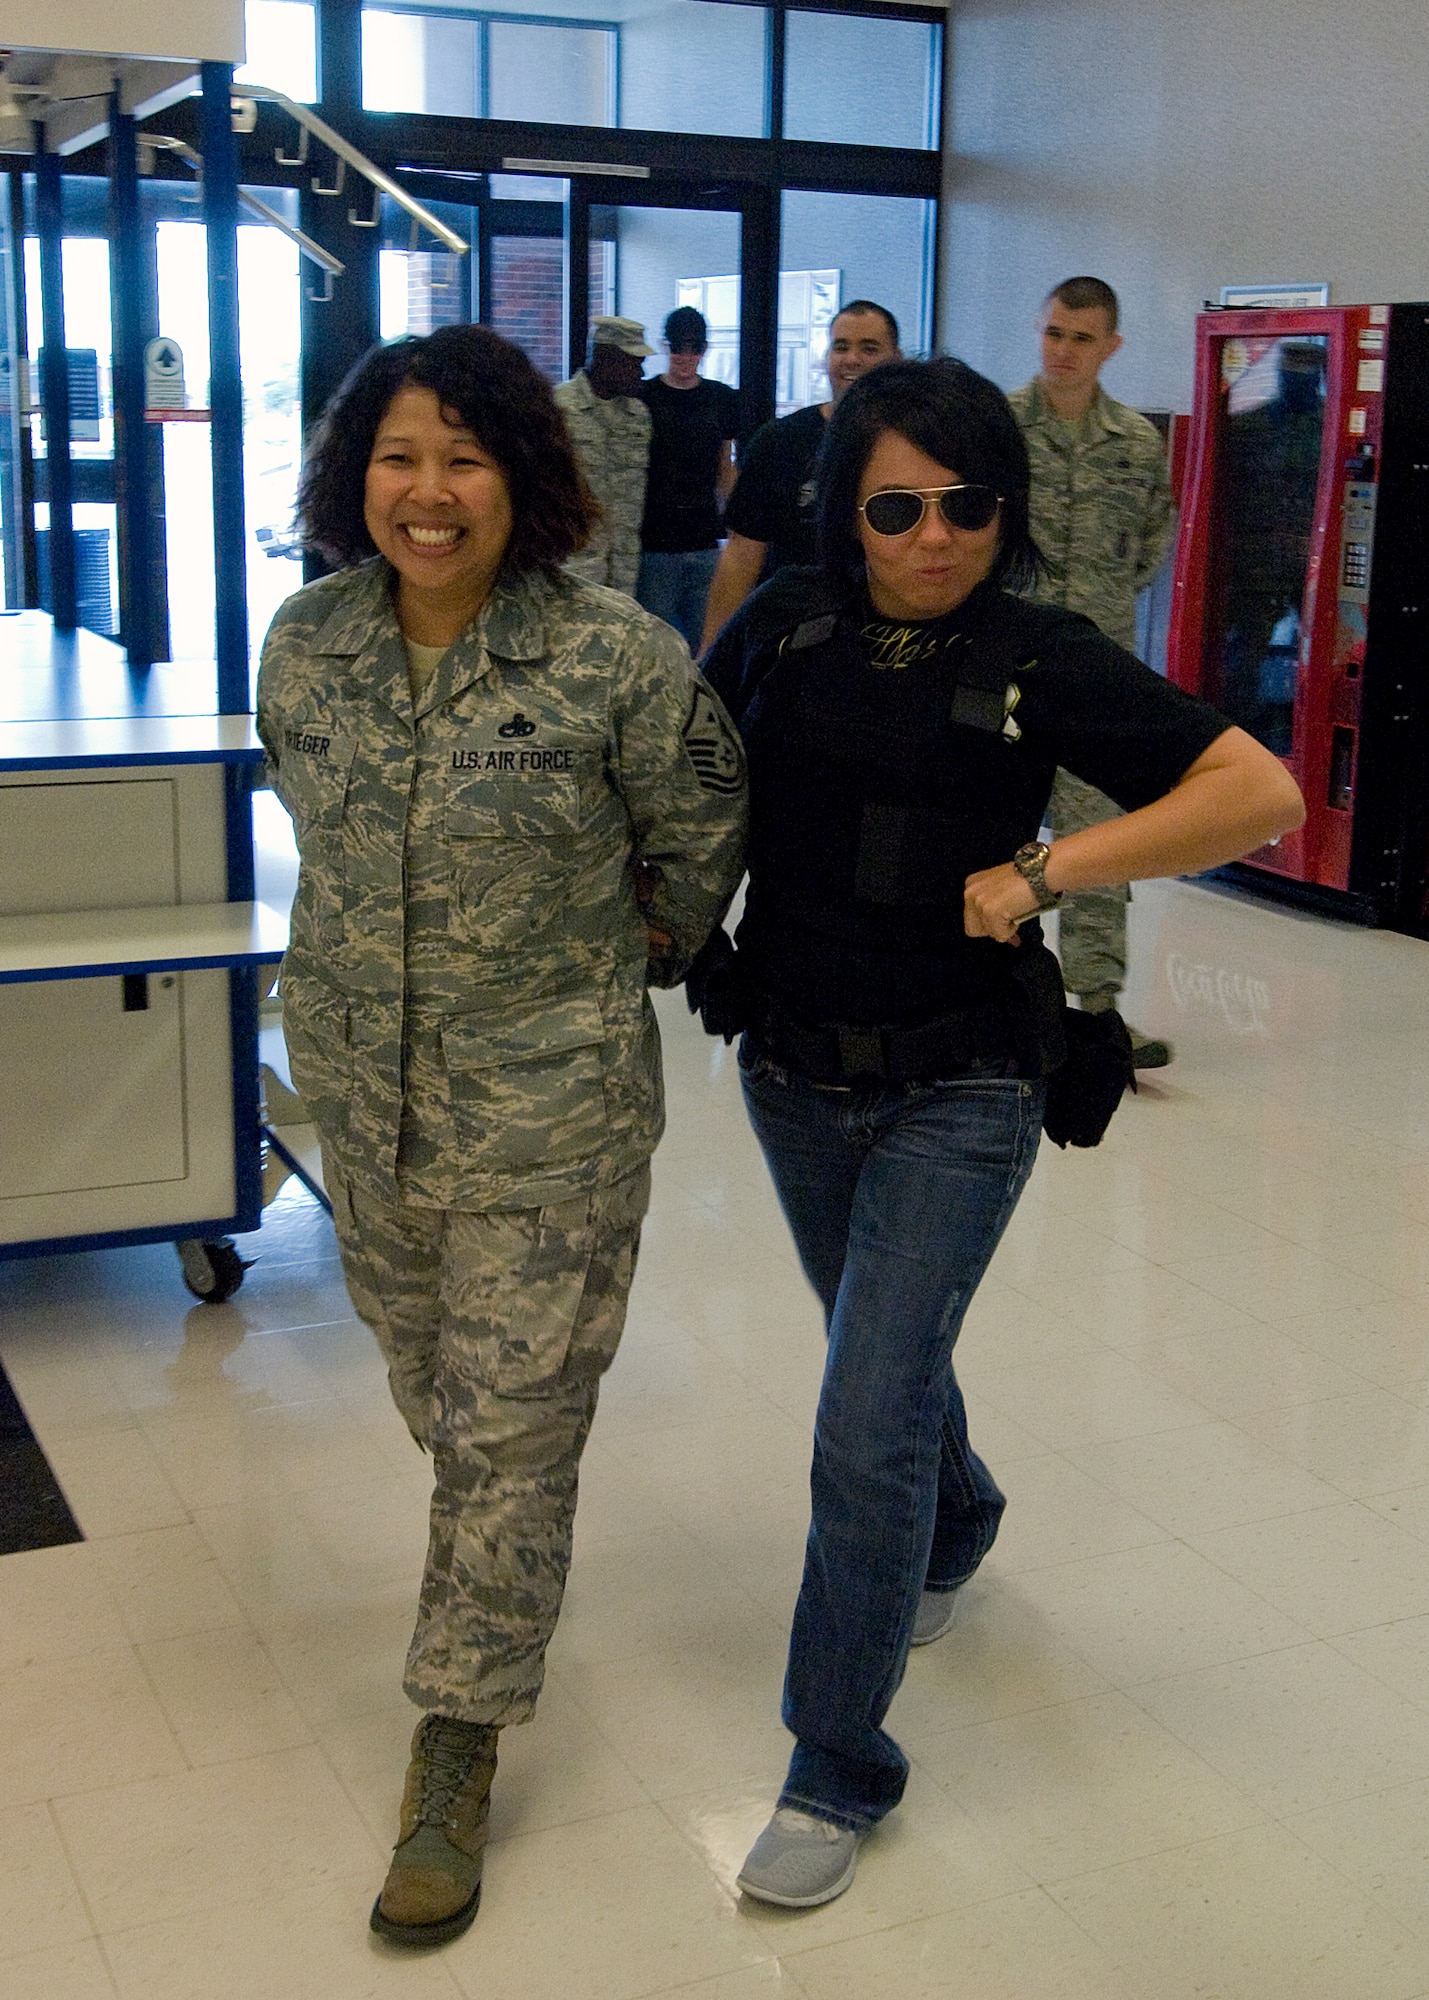 Staff Sgt. Jama Cohea, 7th Security Forces Squadron, escorts Master Sgt. Josephine Krieger, 7th Force Support Squadron first sergeant, to jail during a jail-and-bail fundraiser May 15, 2012, at Dyess Air Force Base, Texas. The fundraiser allowed airmen to have military and civilian personnel from Dyess  arrested and taken to the base exchange, where a make-shift prison cell awaited them. The prisoners were held for one minute for every dollar that was donated toward their arrest. The event was held during National Police Week, proclaimed by President John F. Kennedy in 1962, to honor those who have made the ultimate sacrifice. (U.S. Air Force photo by Airman 1st Class Damon Kasberg /Released)